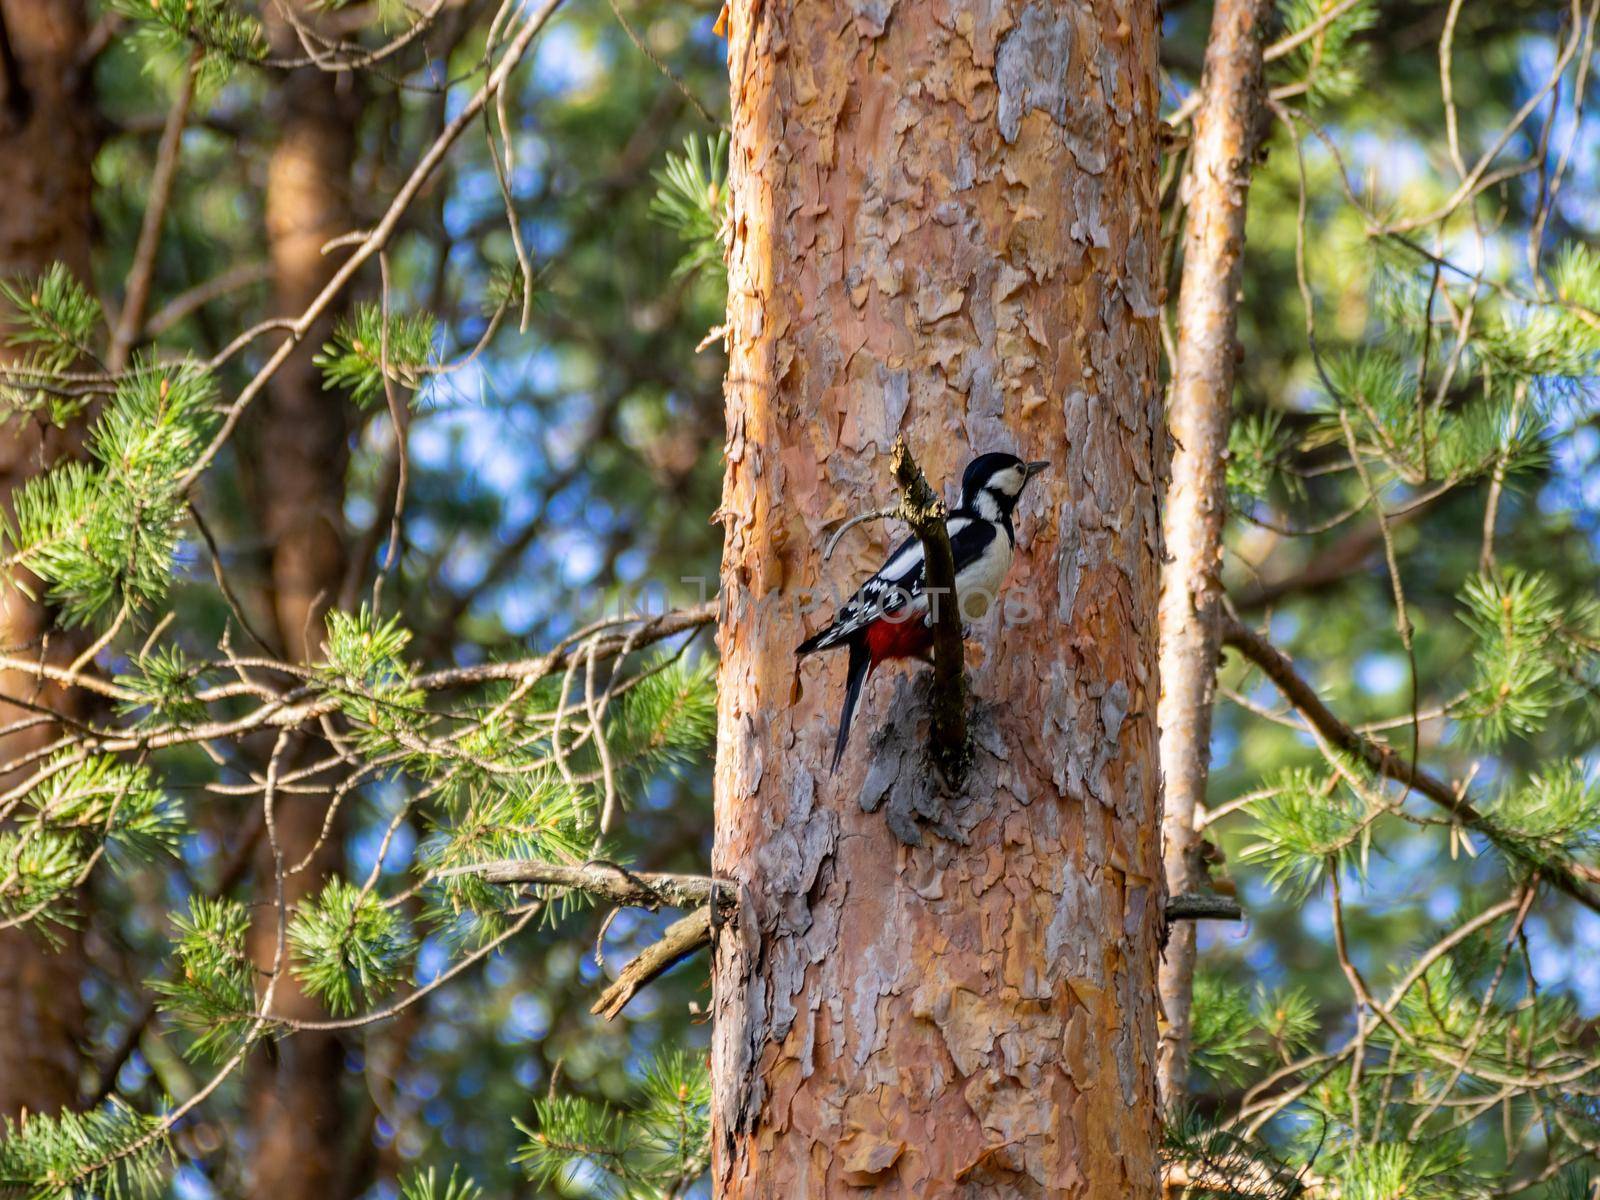 White-backed woodpecker on a pine tree in a summer forest by Andre1ns